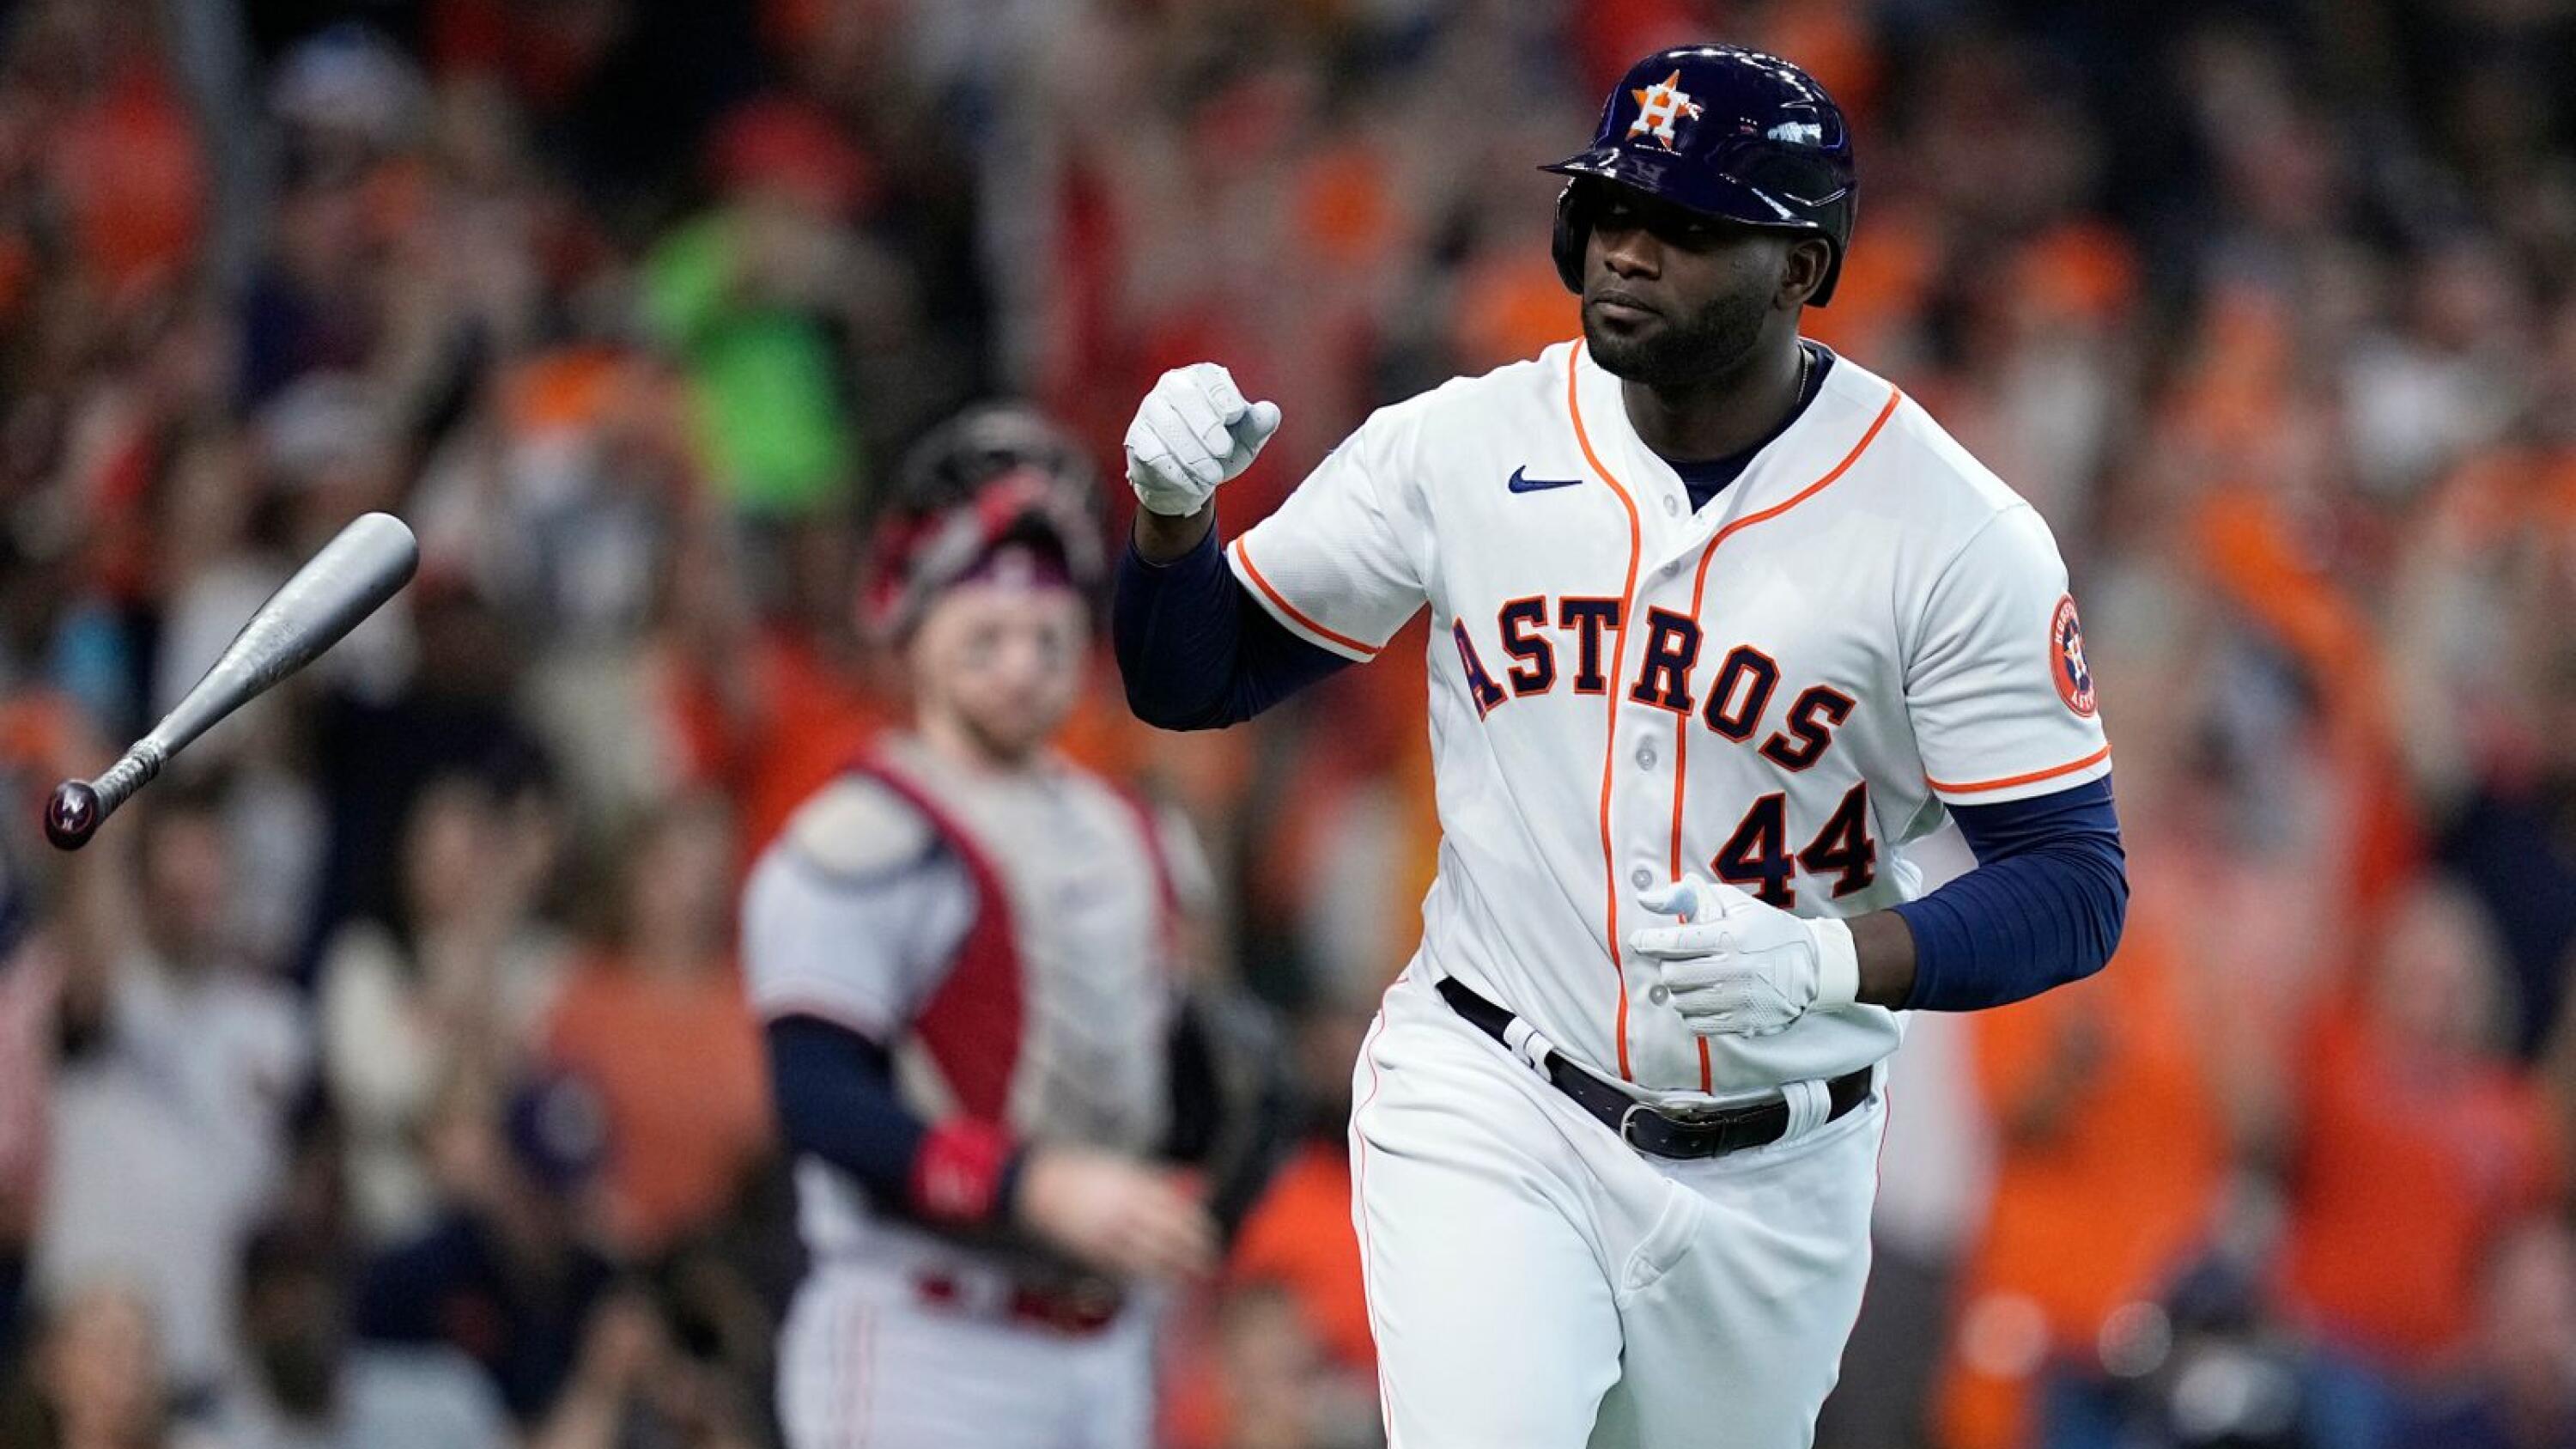 Houston Astros: Late offense leads to win, series lead vs. Rangers